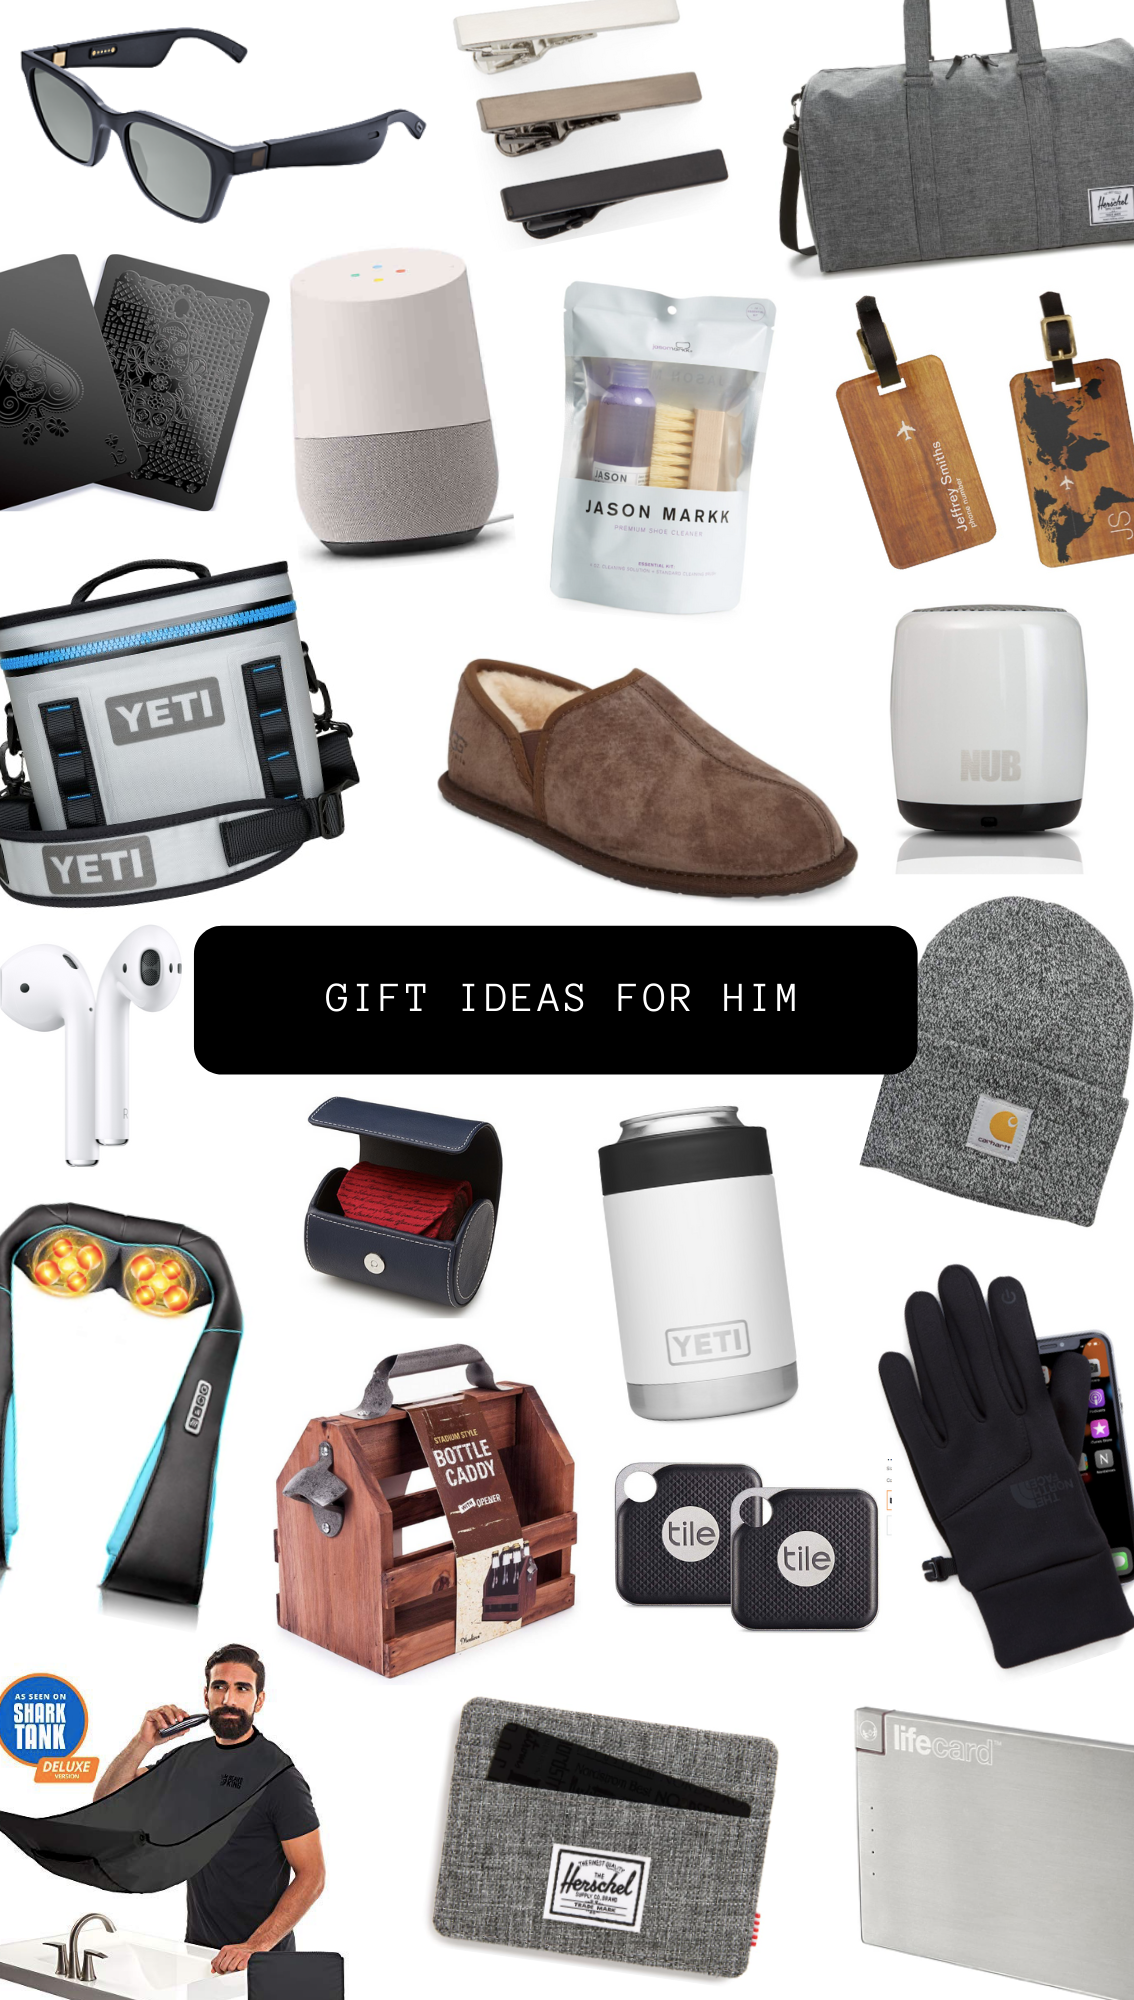 GIFT IDEAS FOR HIM BOYFRIEND DAD MAN IN YOUR LIFE